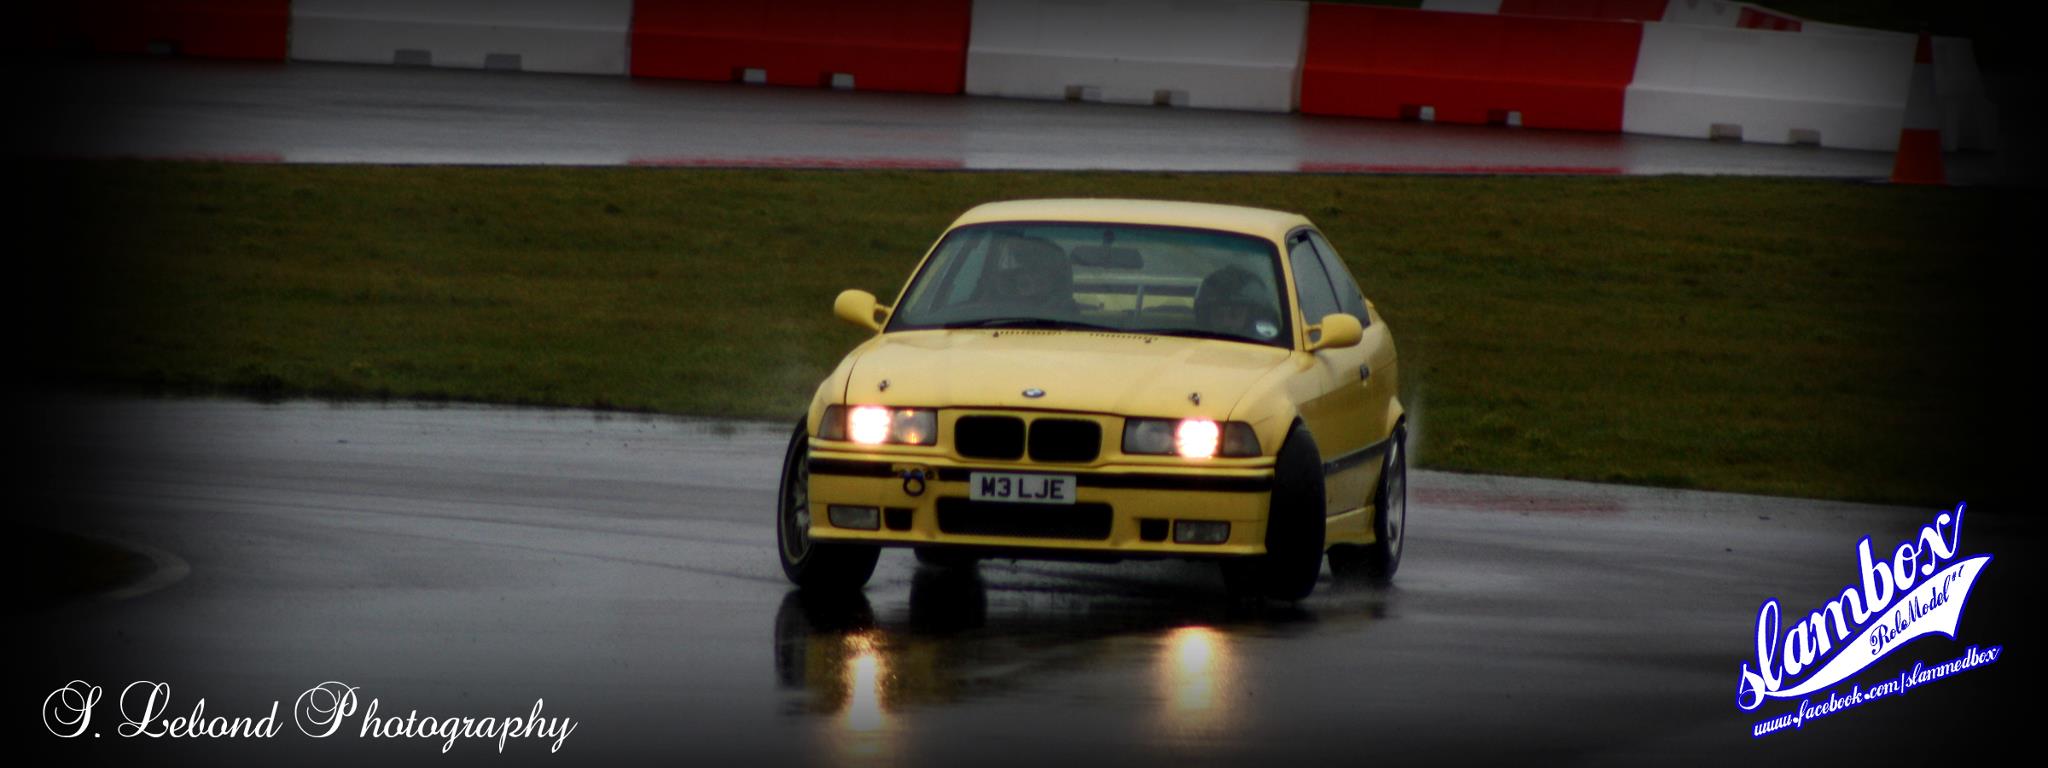 a yellow bmw car racing on a track